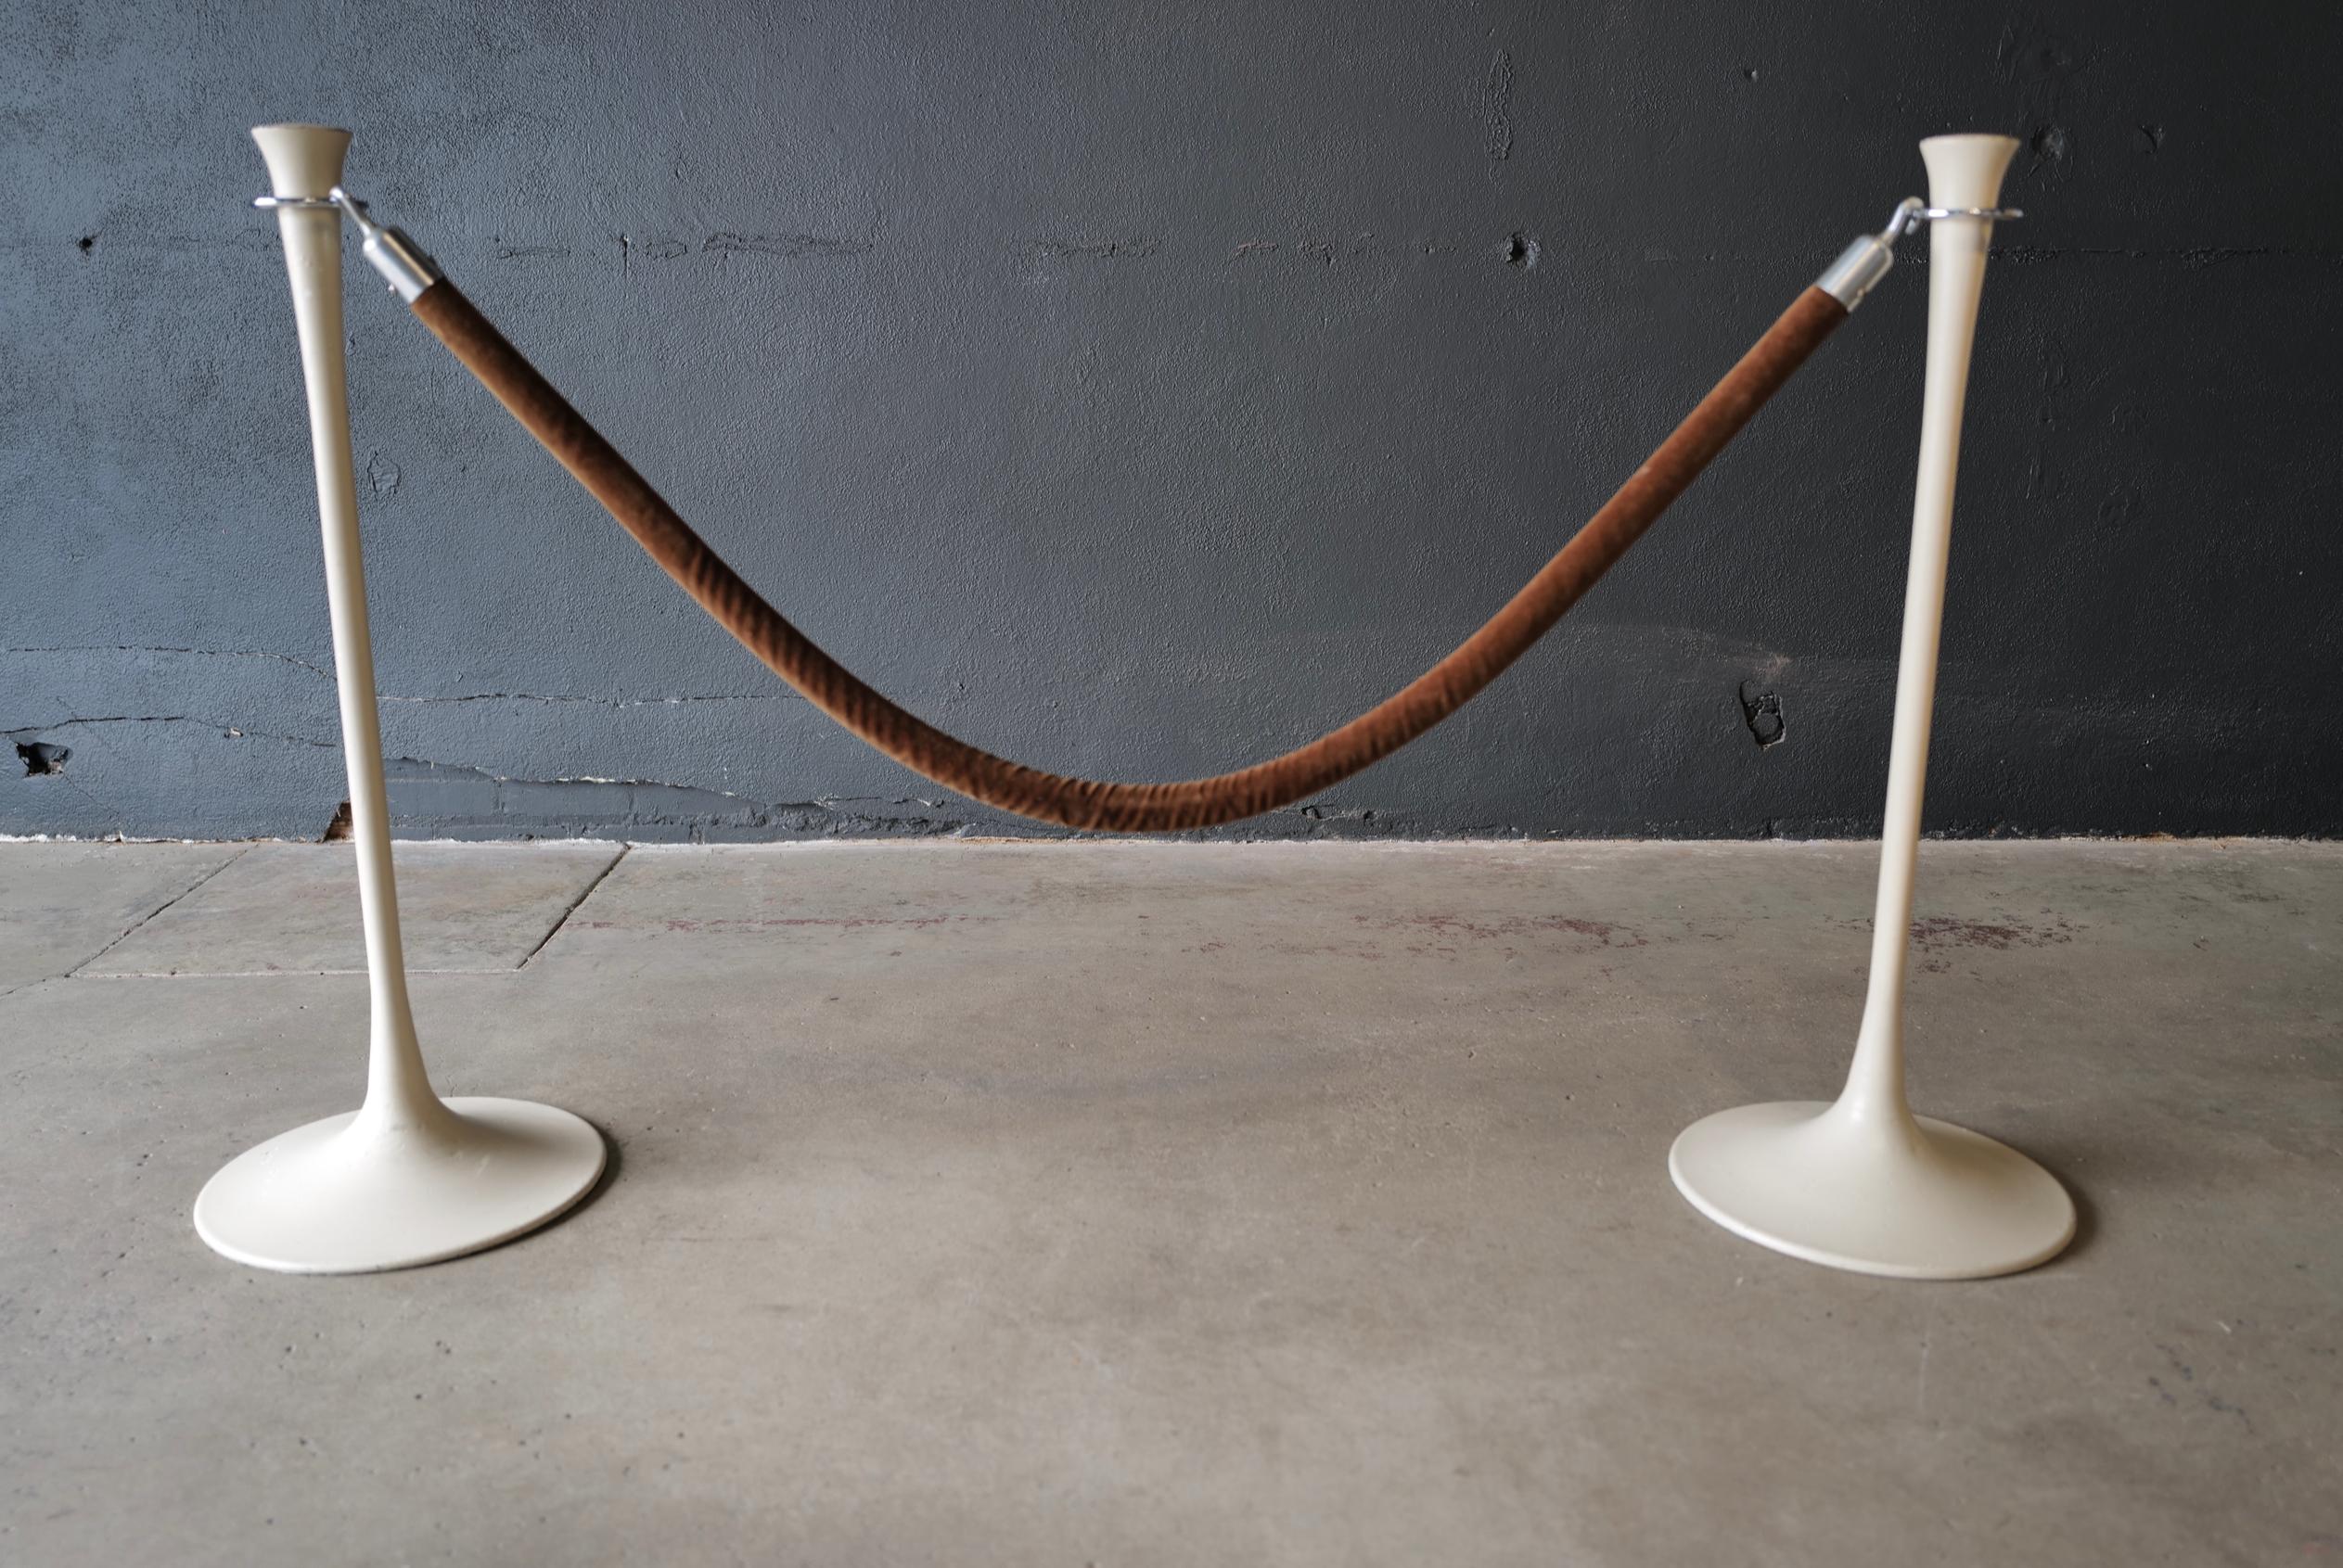 These mid-century Saarinen style stanchions with brown velvet rope exude elegance and sophistication. The stanchions feature the iconic tulip-shaped bases, inspired by the designs of renowned architect Eero Saarinen. The bases are crafted from